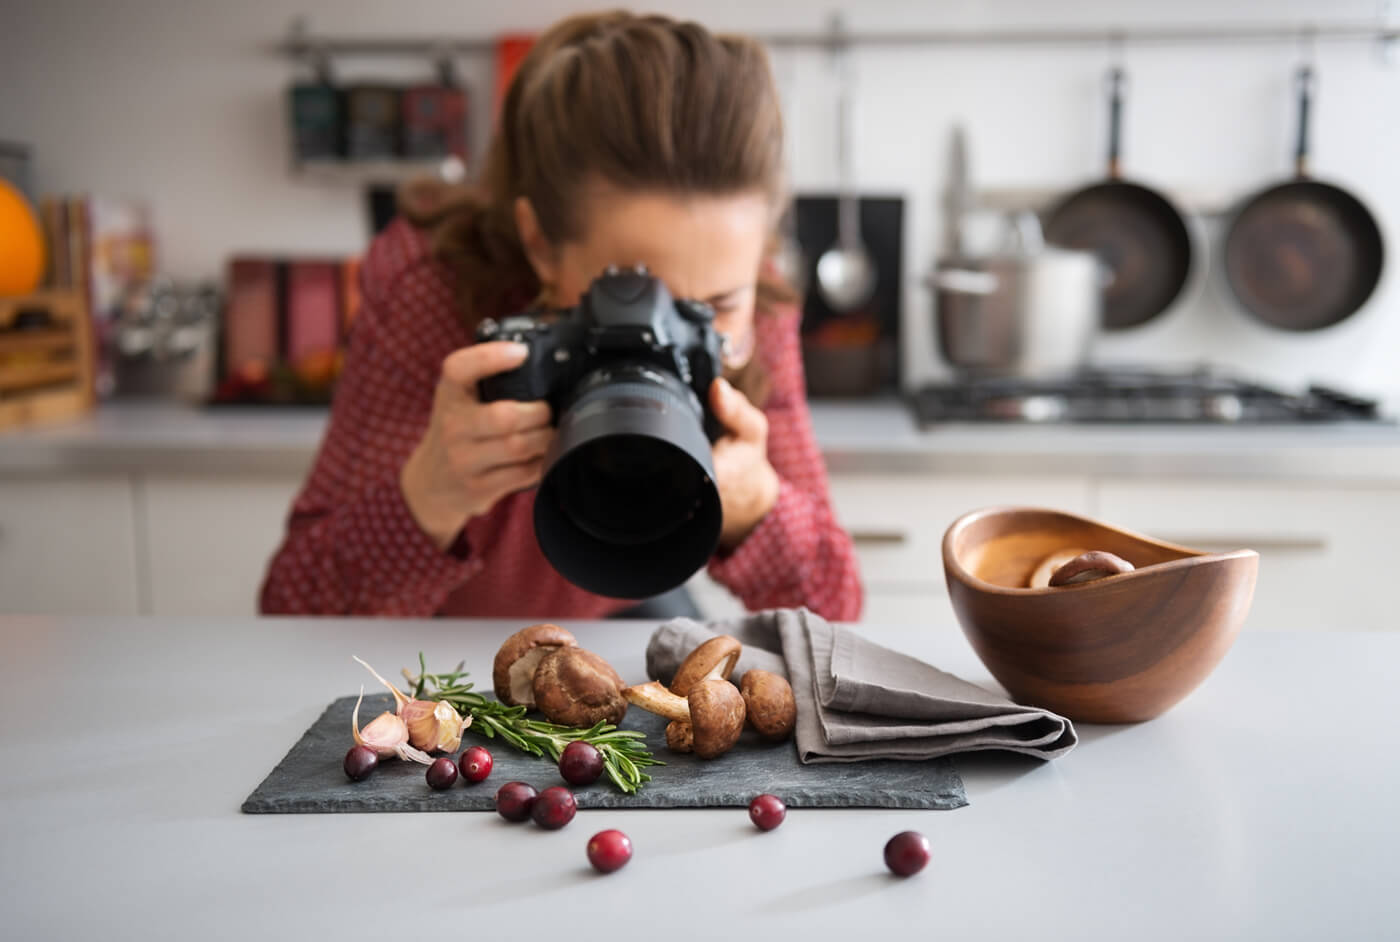 5 Photo Projects to Try While You Work From Home